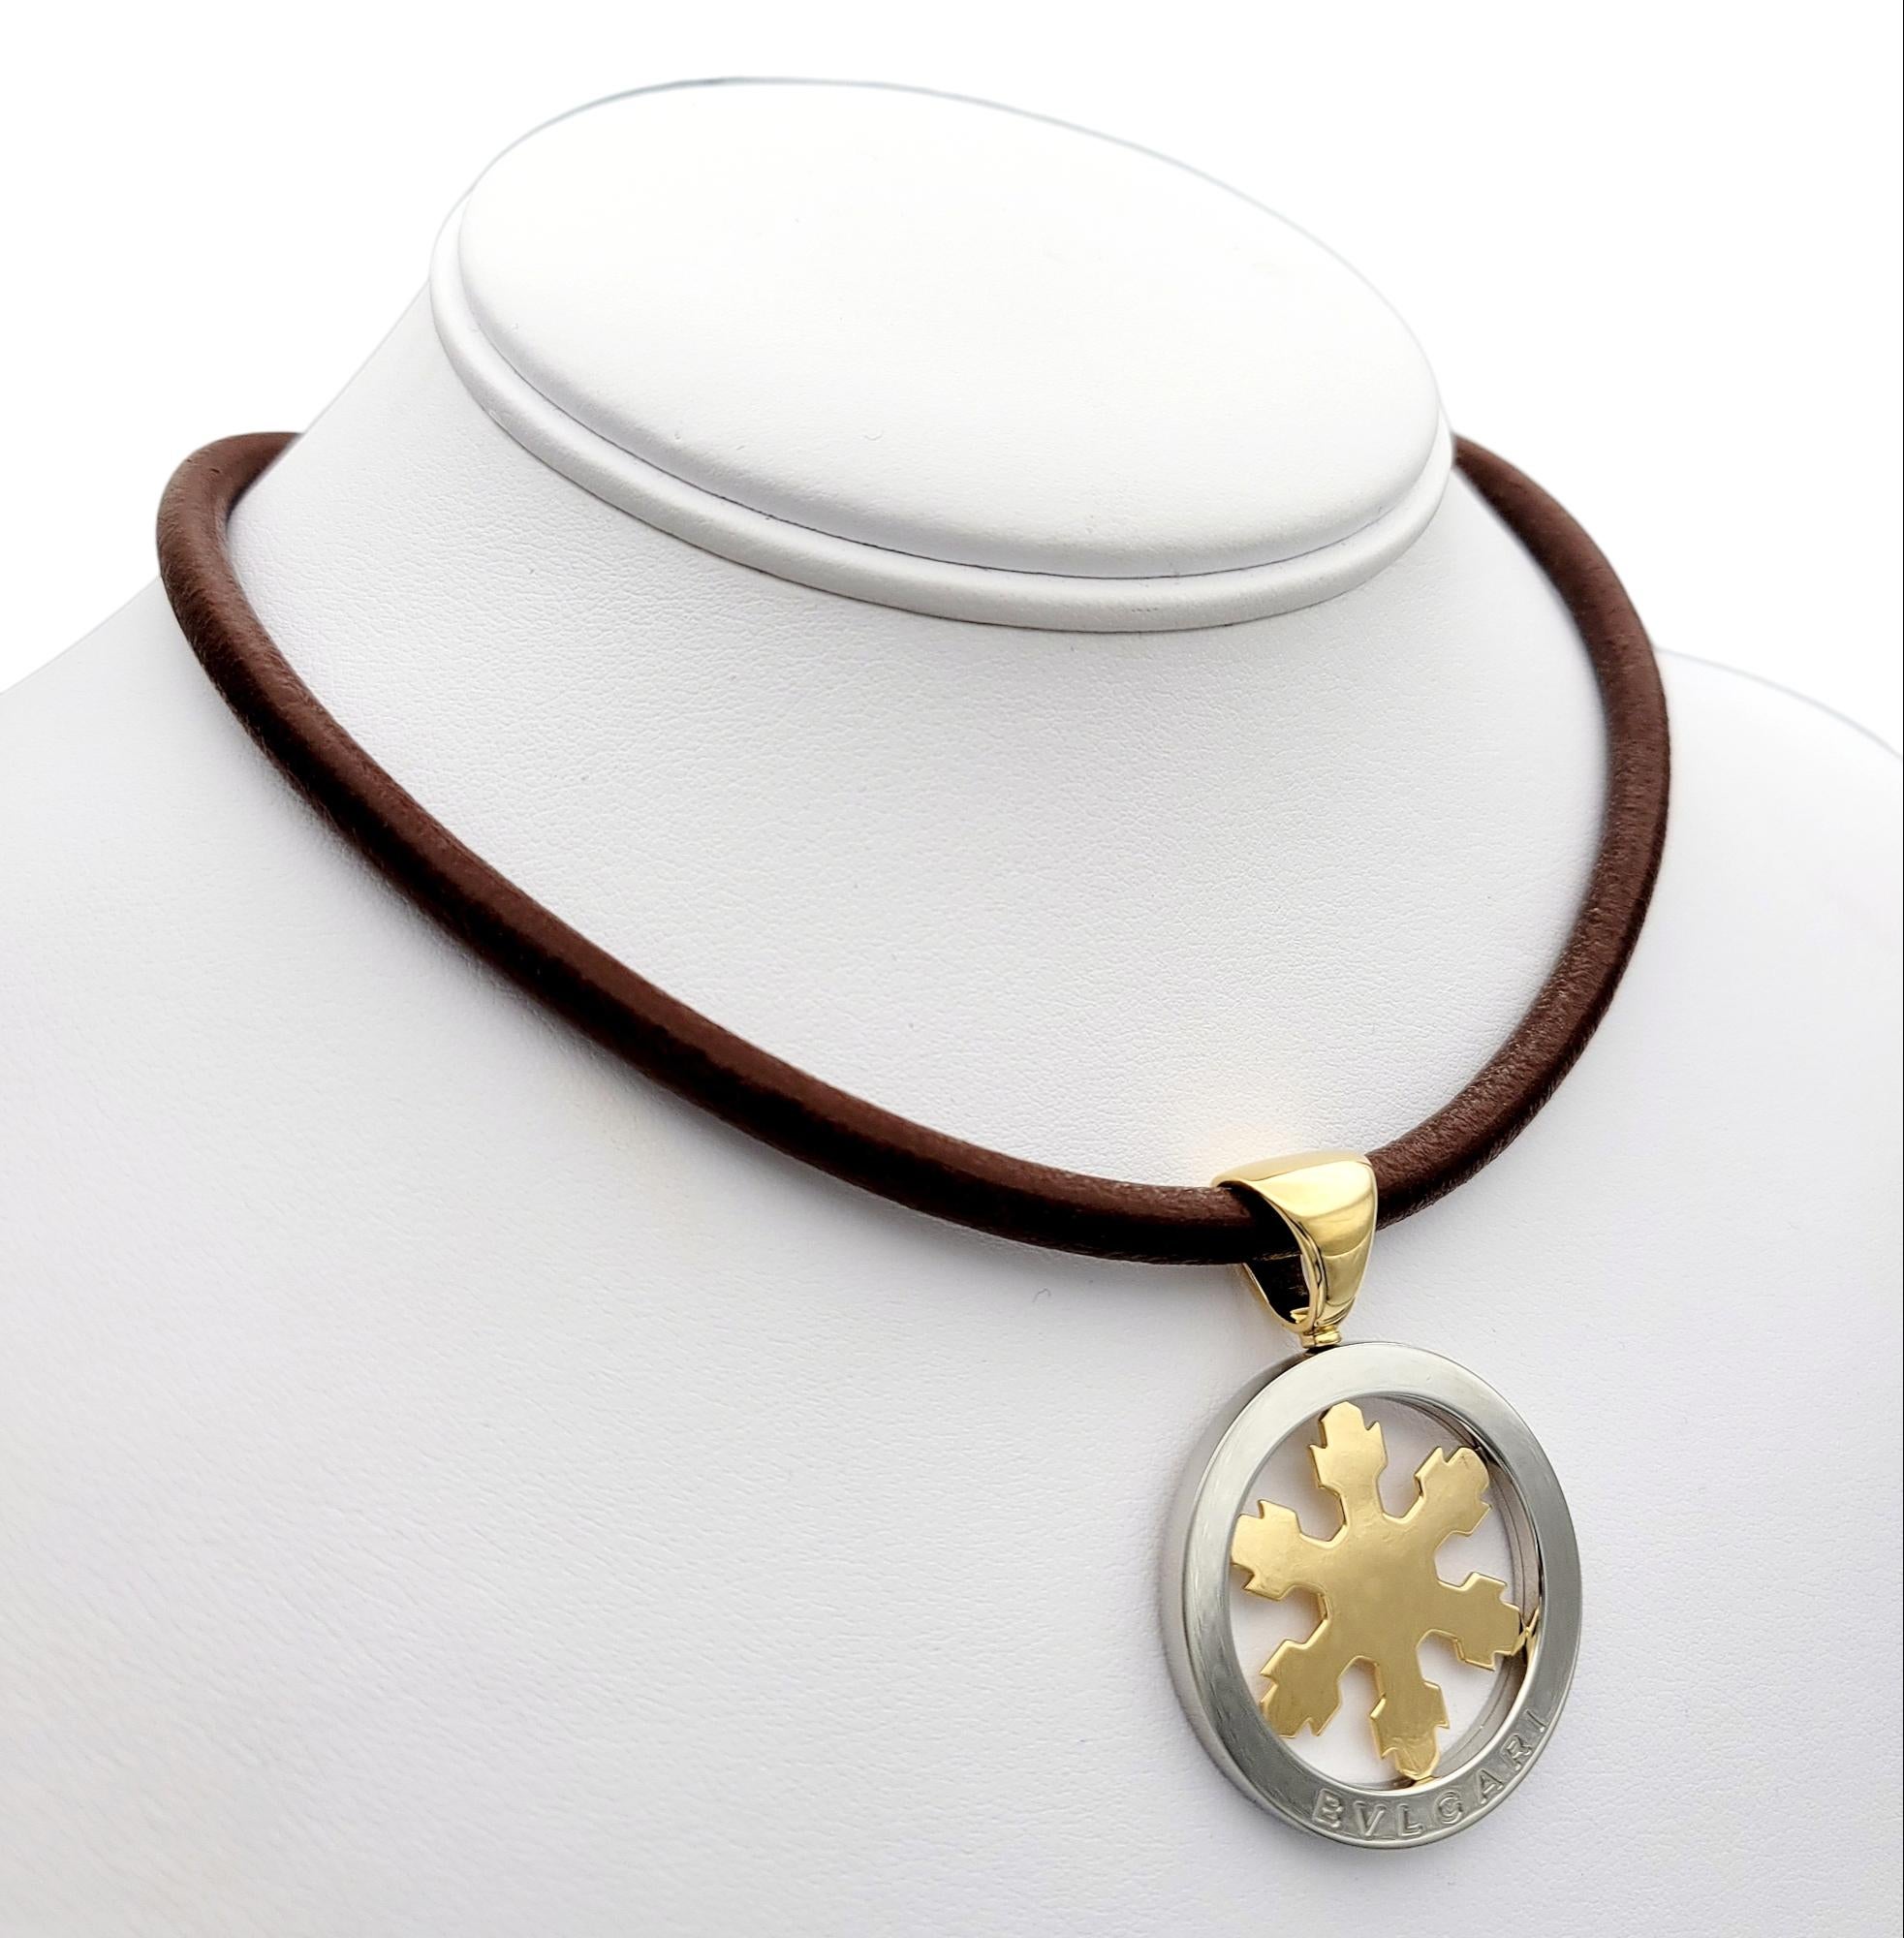 Bvlgari Tondo Snowflake Leather Necklace in 18k Yellow Gold & Stainless Steel 6